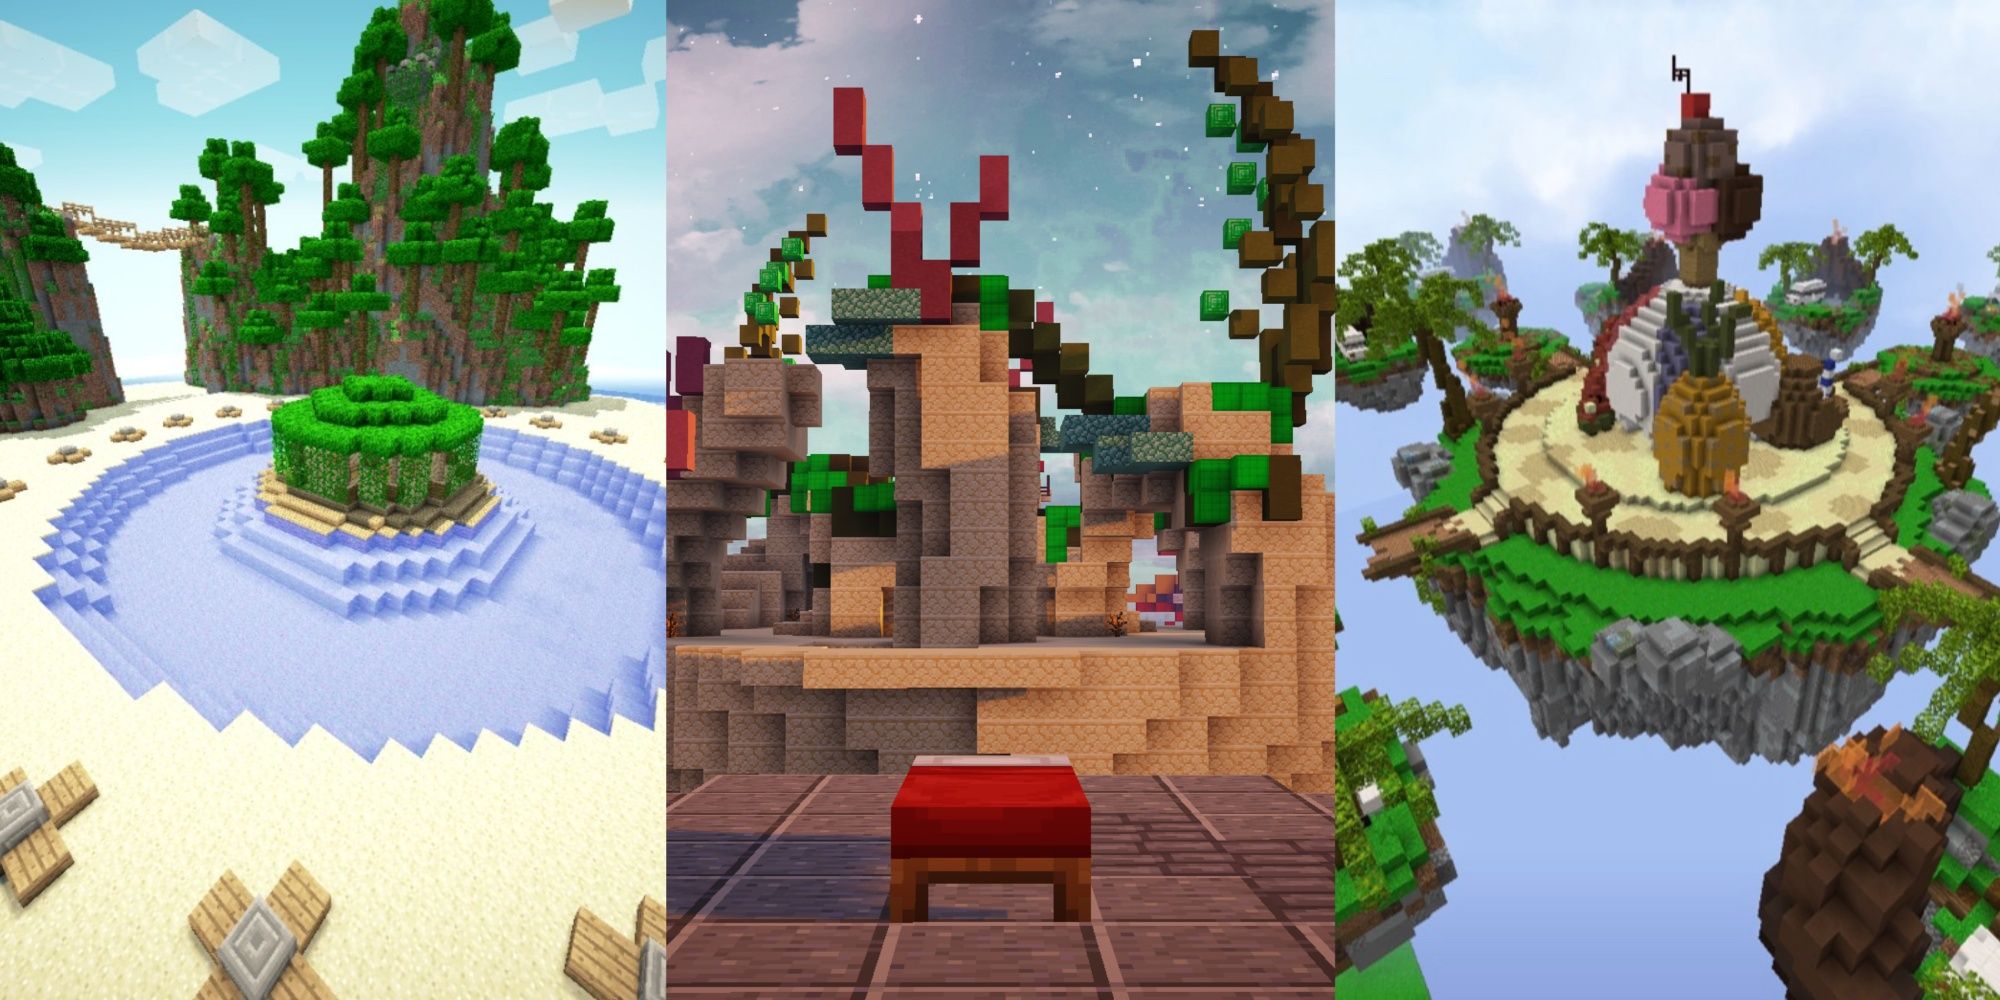 Collage image of different Minecraft locations.